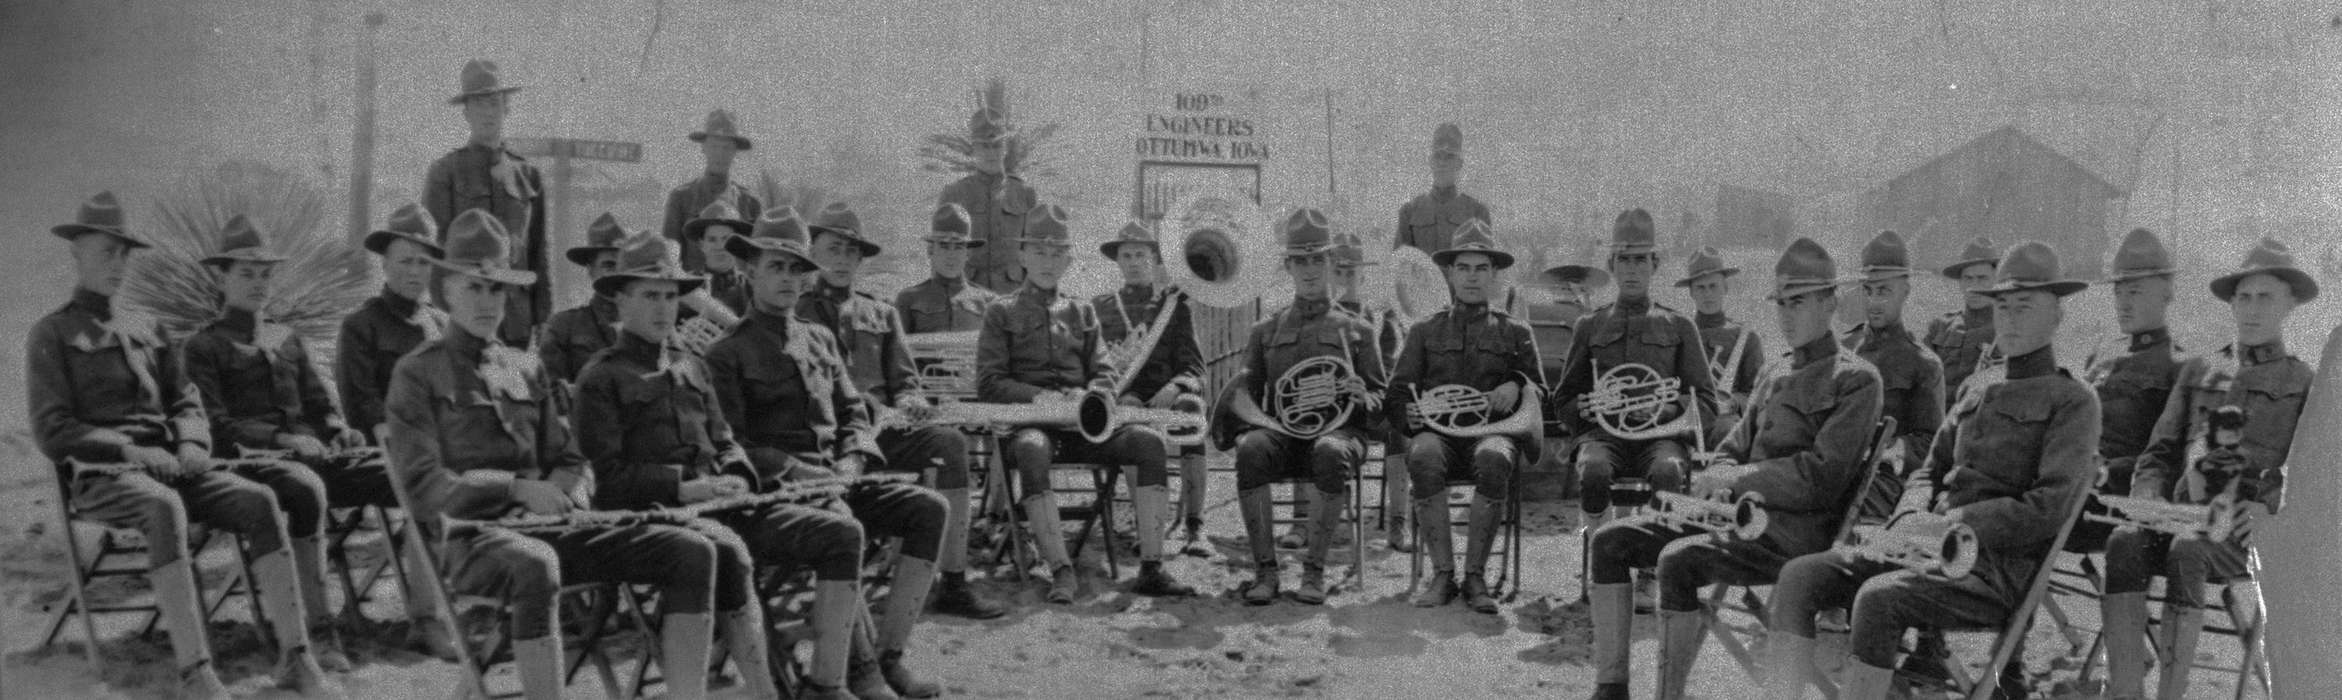 Military and Veterans, Iowa History, french horn, trumpet, Portraits - Group, military, Iowa, USA, Lemberger, LeAnn, flute, band, history of Iowa, tuba